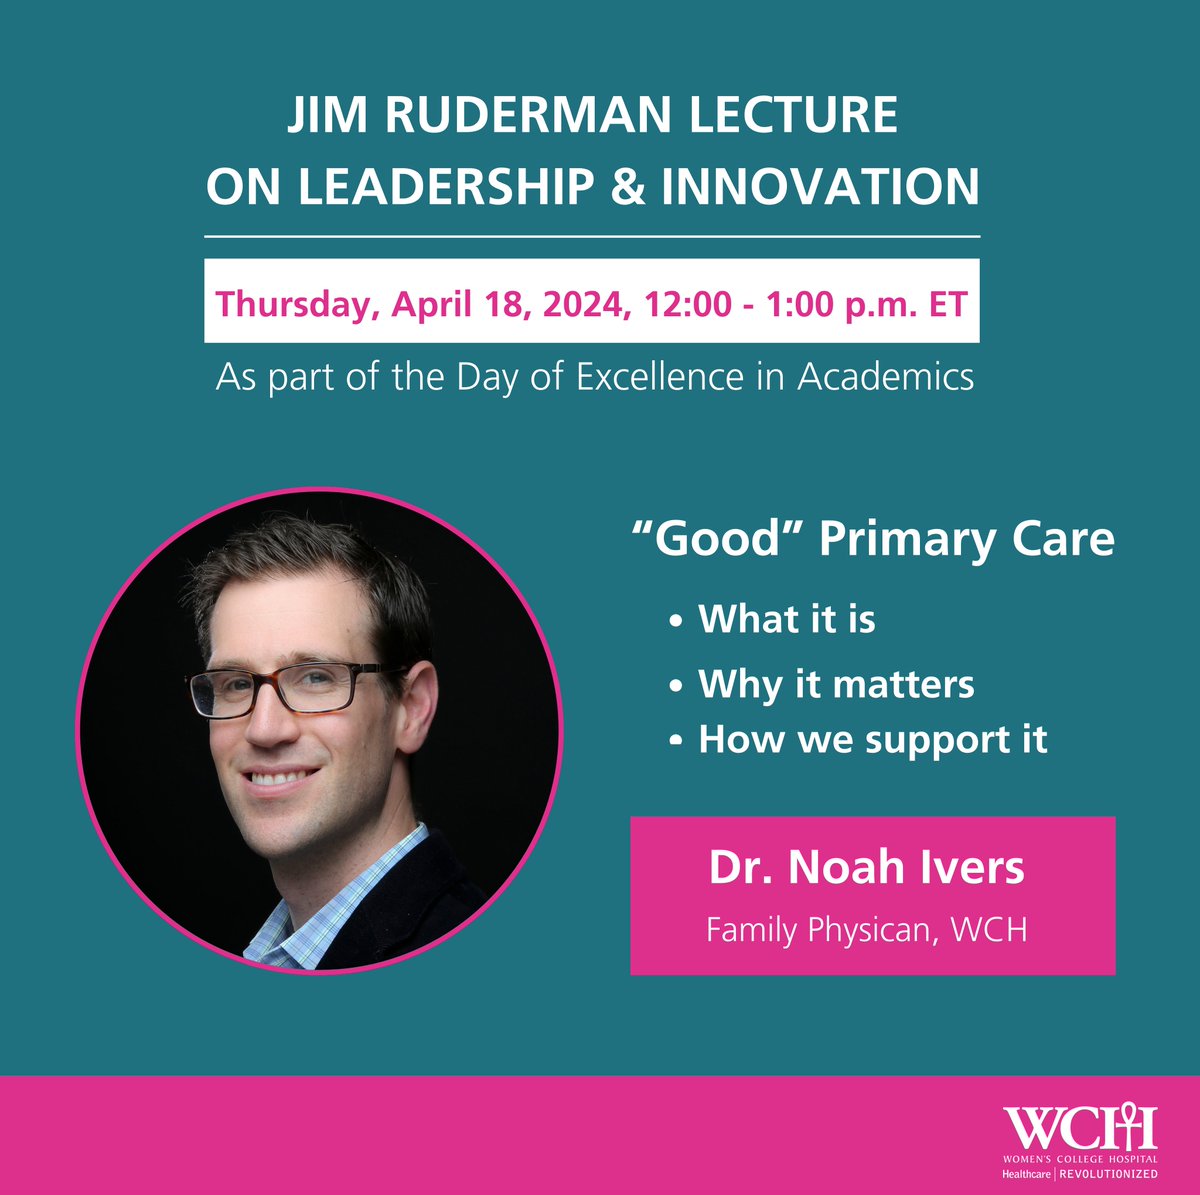 Just one week until the 2024 Ruderman Lecture at Women's College Hospital! Join us in person or virtually to hear family physician Dr. Noah Ivers present on “Good” Primary Care: What It Is, Why It Matters, and How We Support It. Register here - loom.ly/MO9s7f4